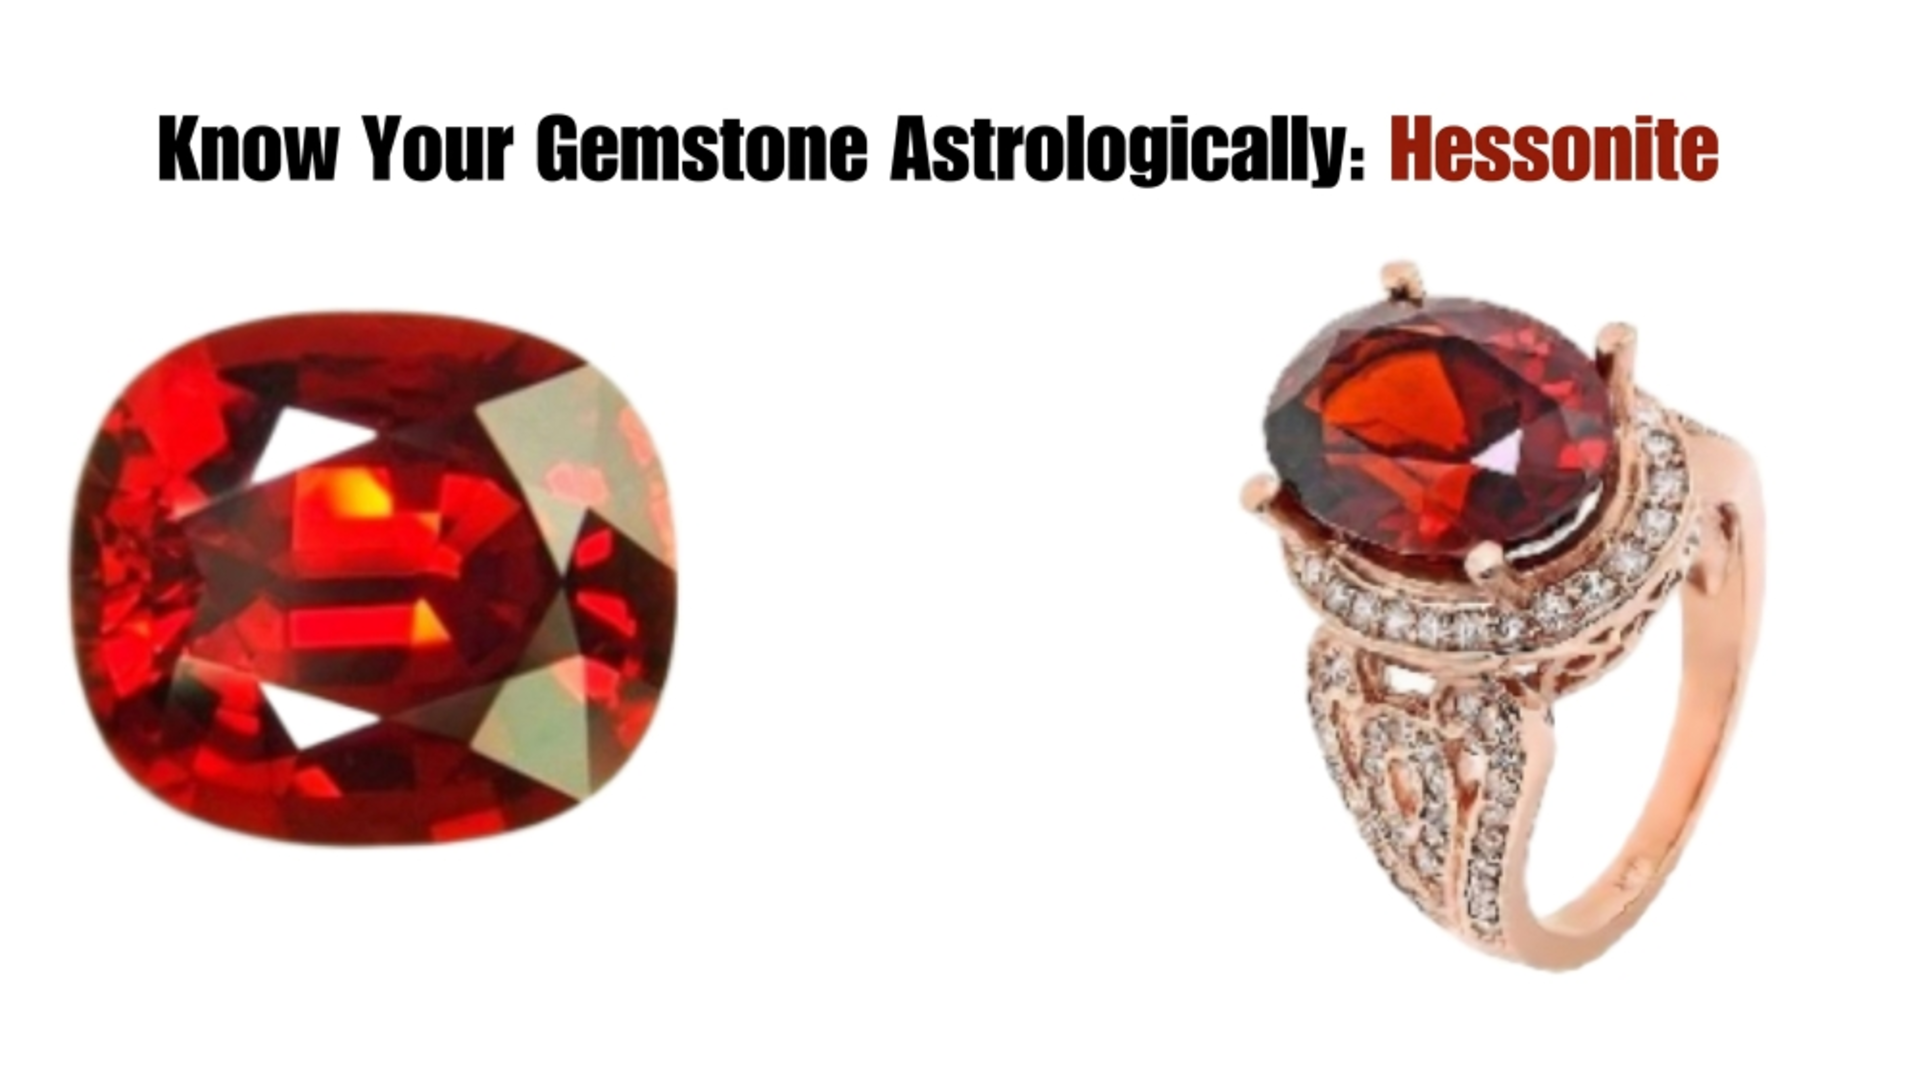 Know-Your-Hessonite-Gem-Astrologically.